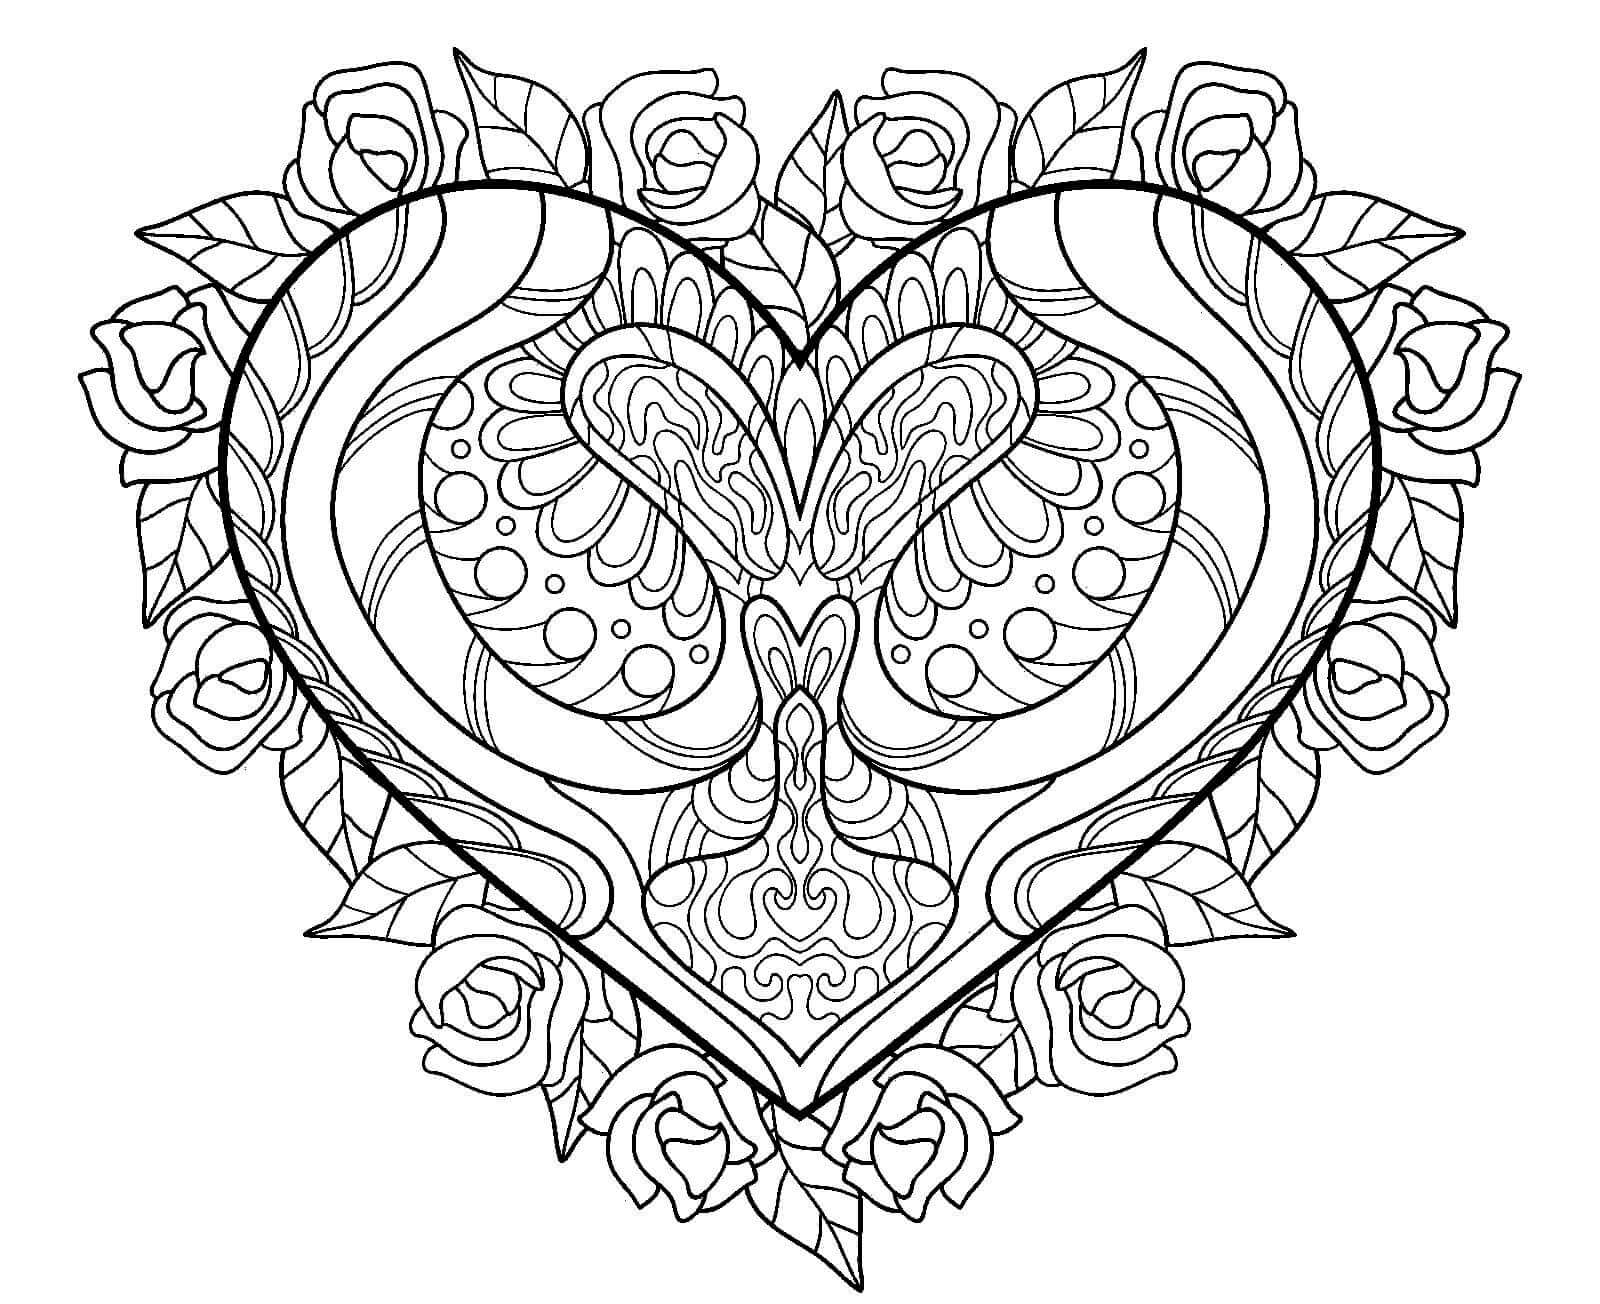 heart coloring pages for adults | heart coloring meaning | heart coloring pages for toddlers